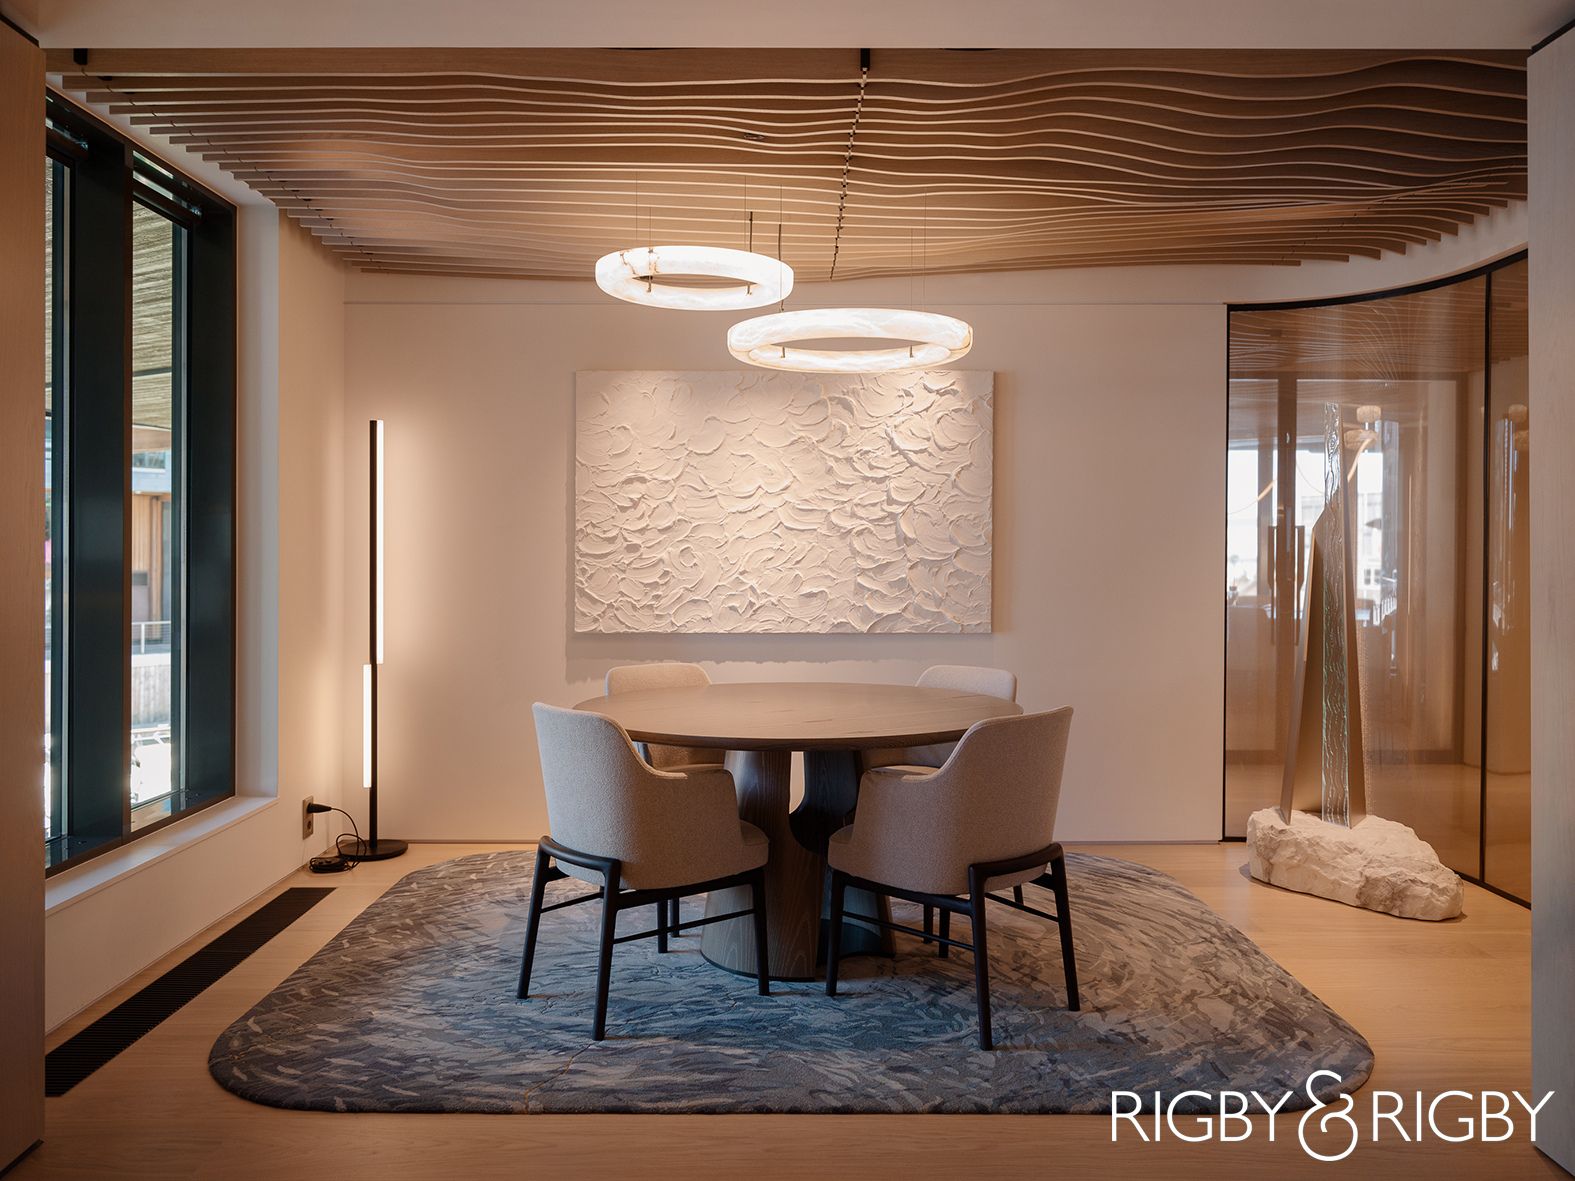 industry insights, A Q&A with James Ashfield: Studio Director of Interior Design at Rigby & Rigby